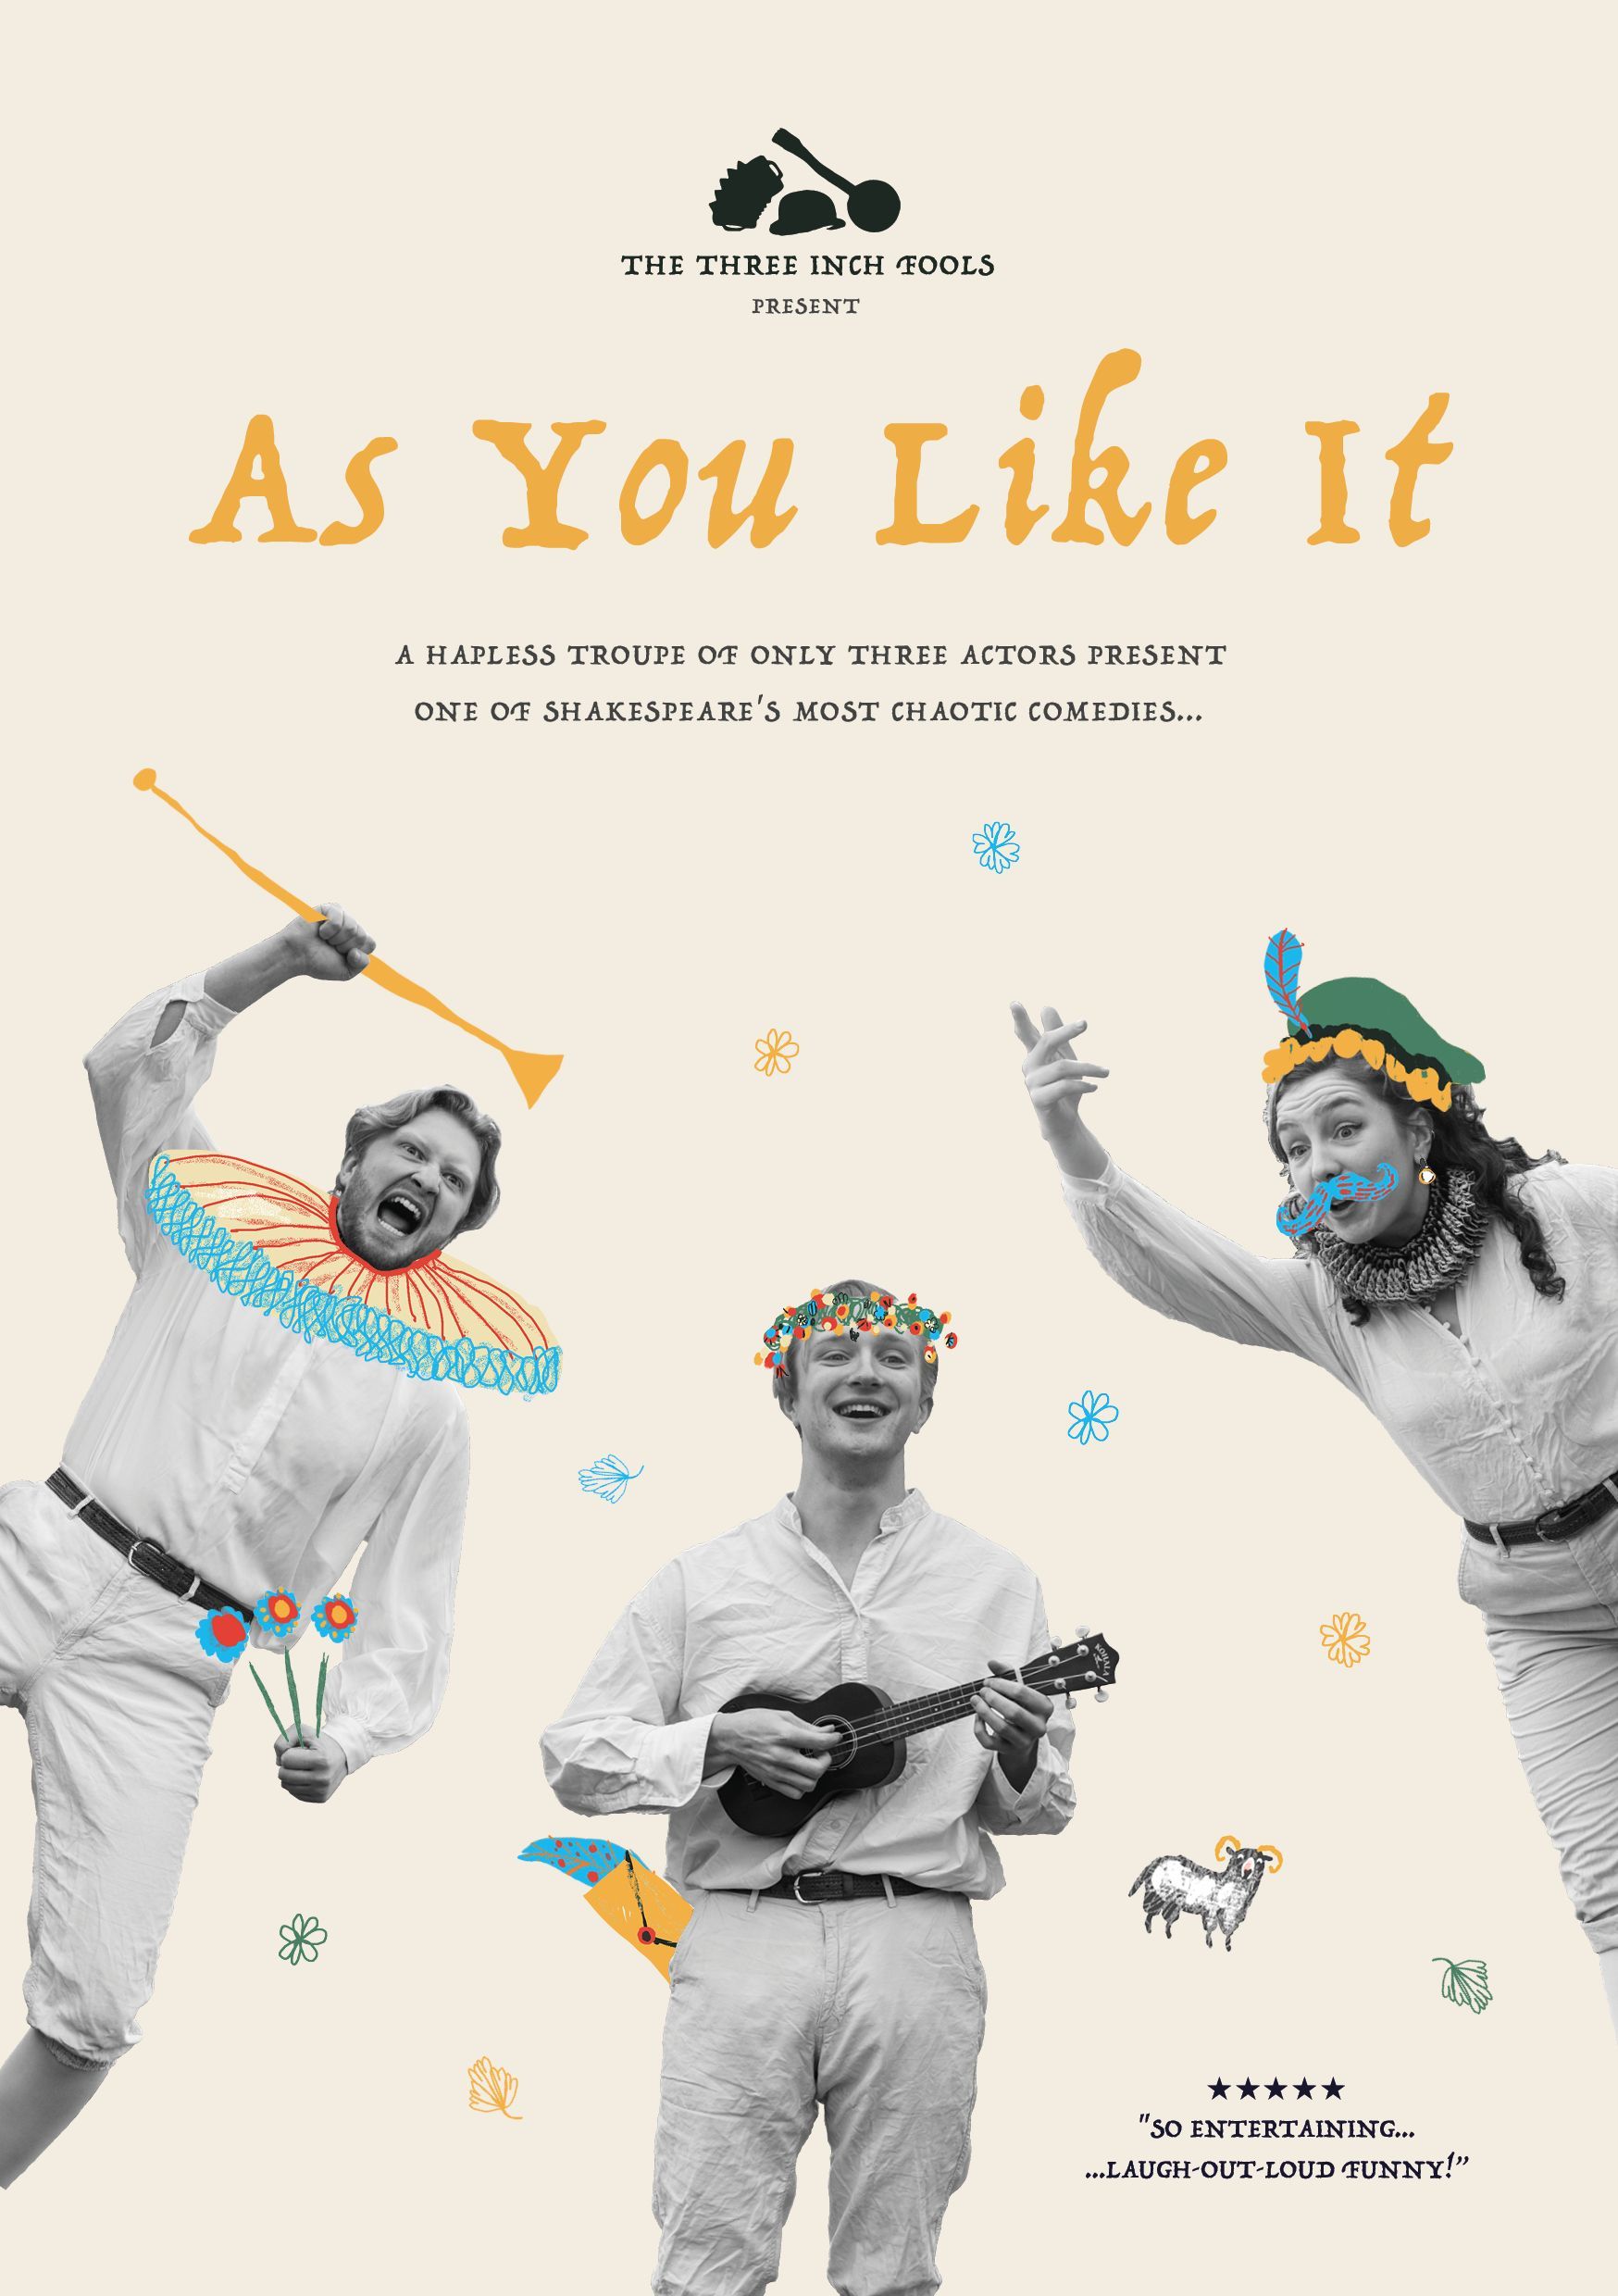 A poster for a play called as you like it